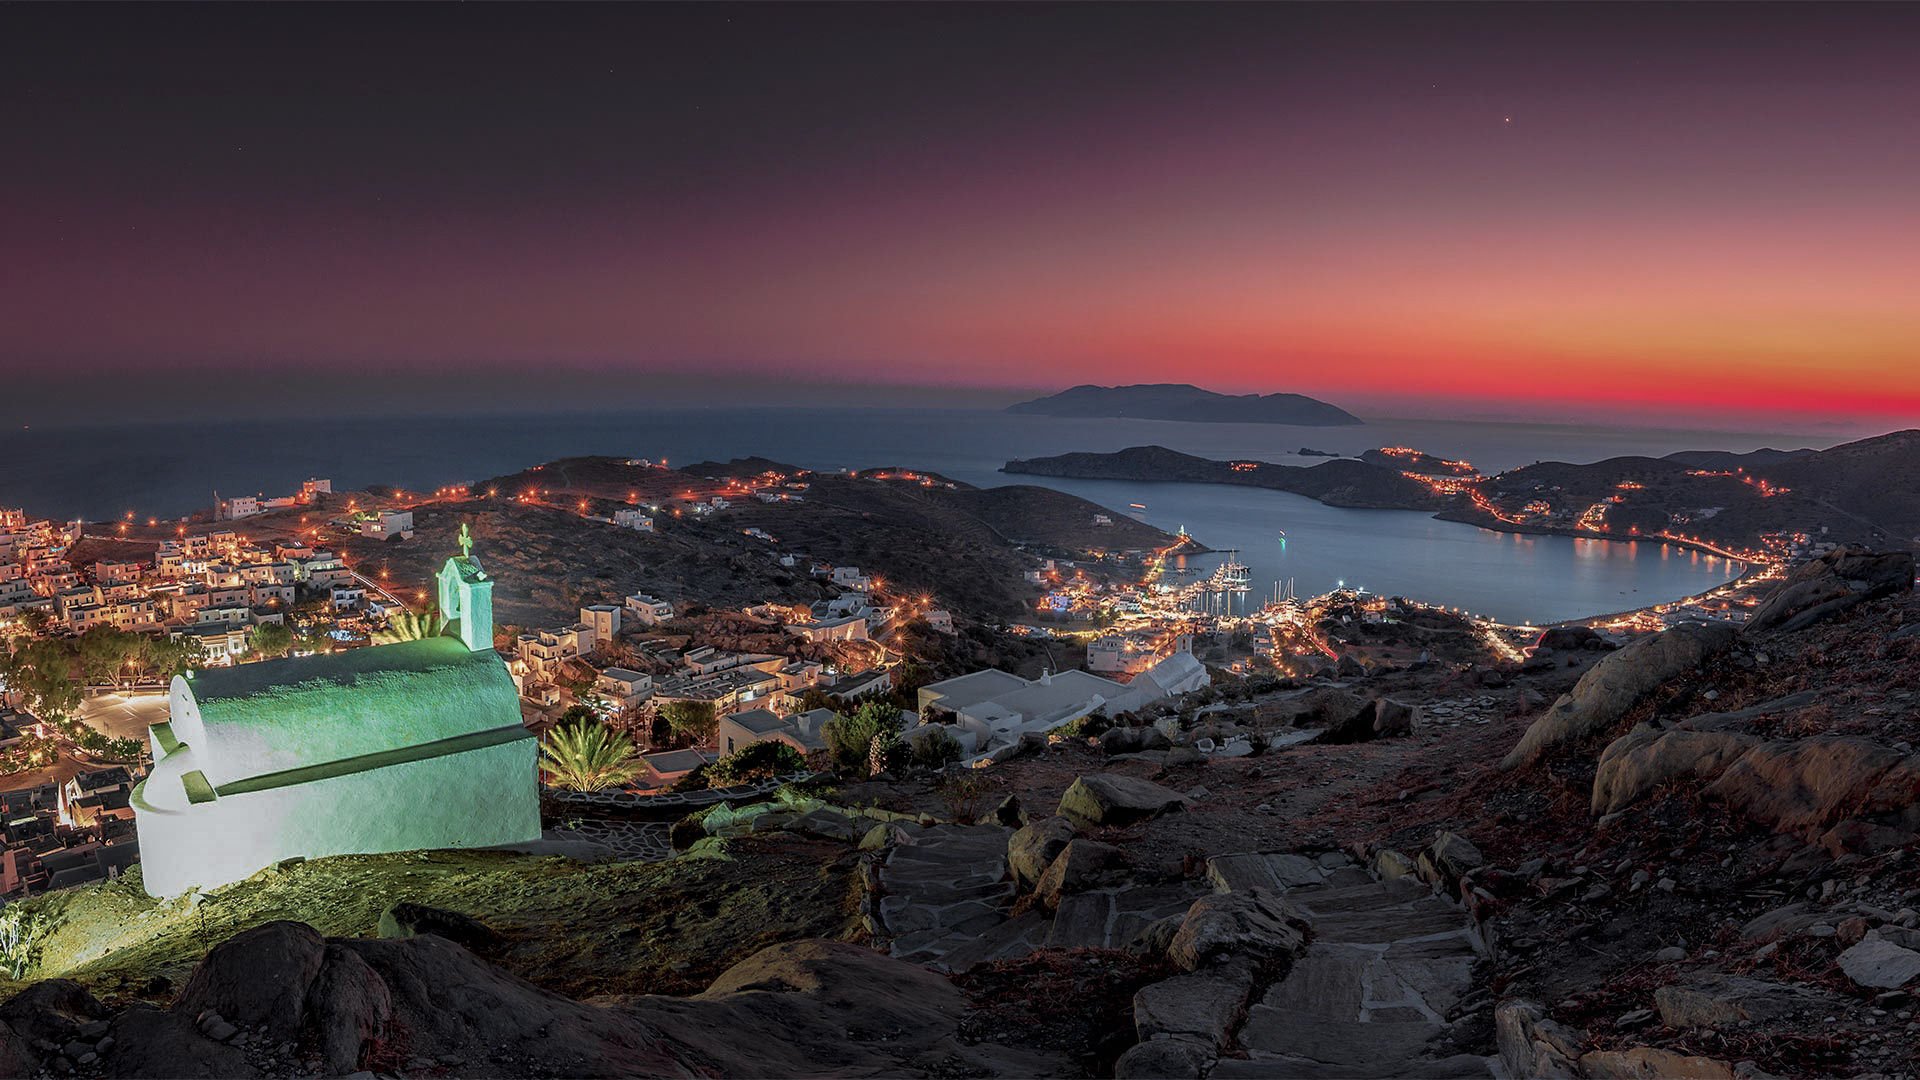 The Church of Panagia Gremniotisas can be found at the highest point of Hora offers perhaps the best view, especially at sunset